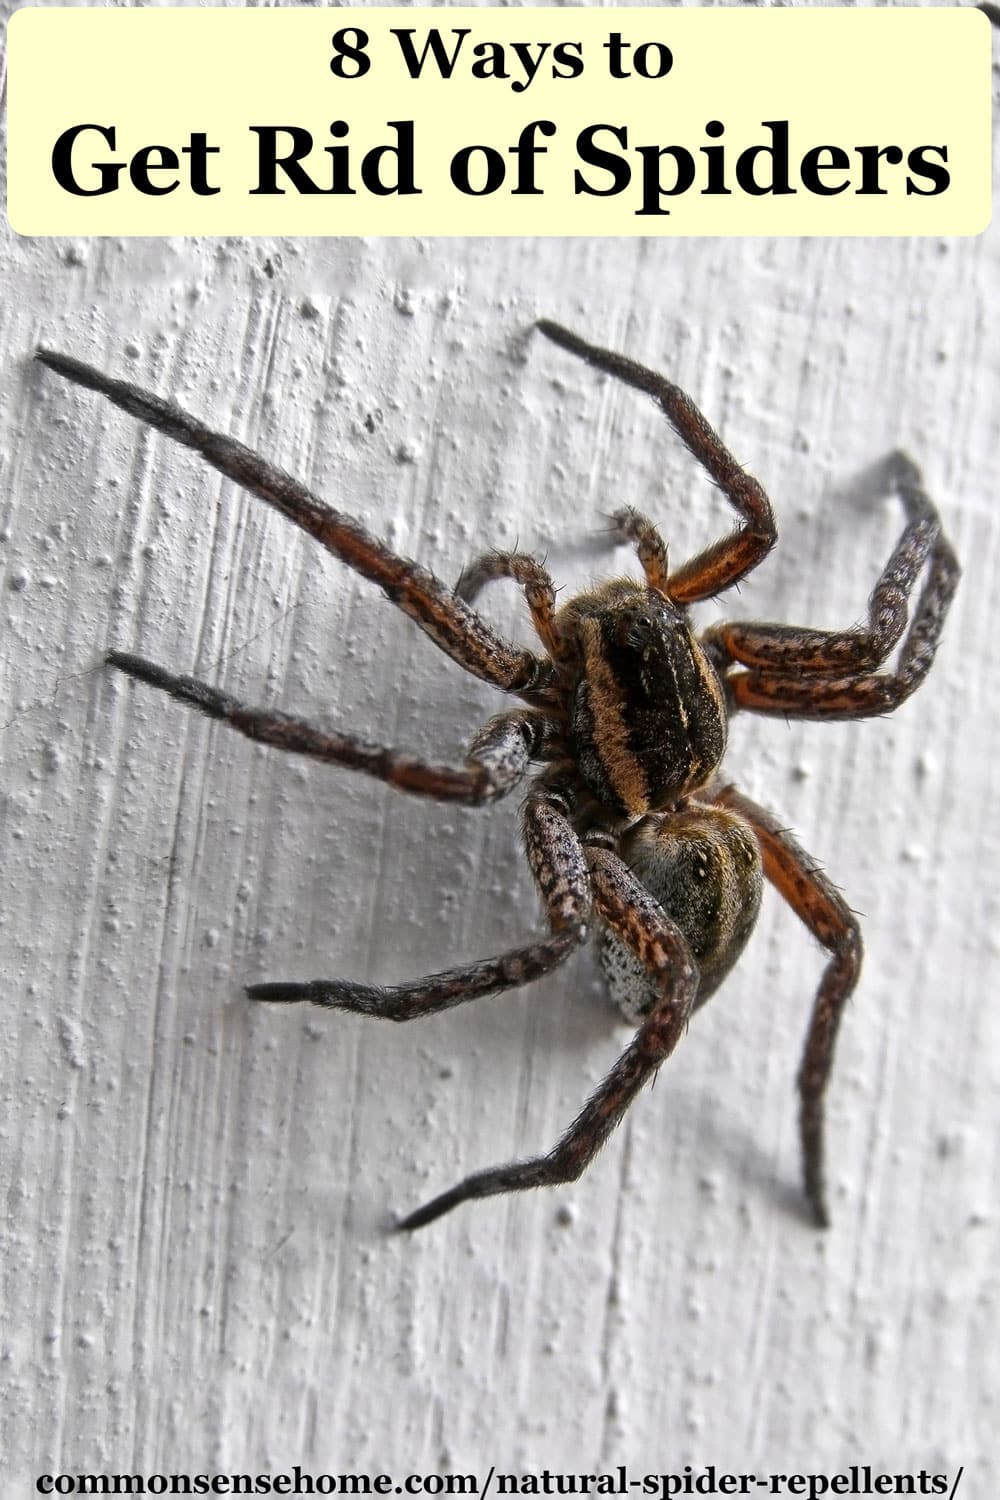 Natural Spider Repellents - 8 Ways to Get Rid of Spiders -   19 how to get rid of spiders in the house ideas